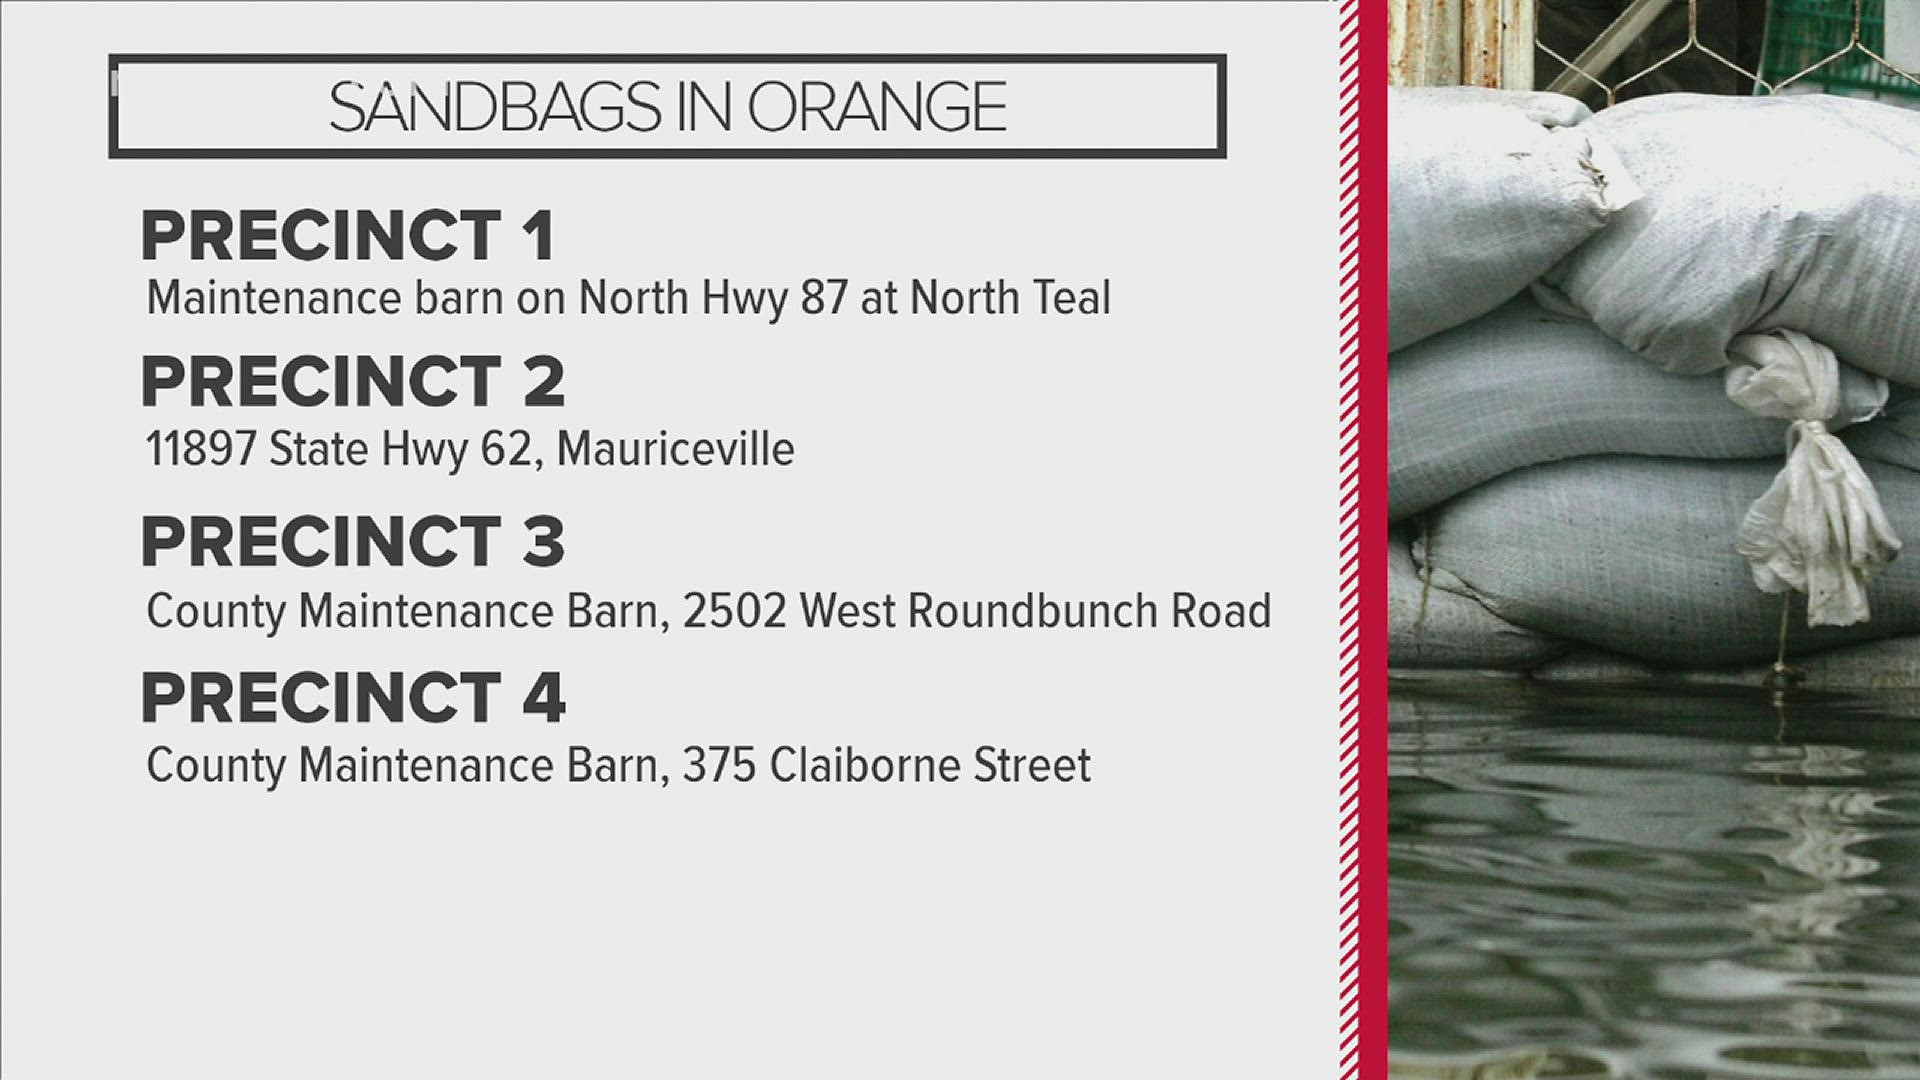 In Orange County, the Office of Emergency Management has set up four locations to fill up on sandbags.